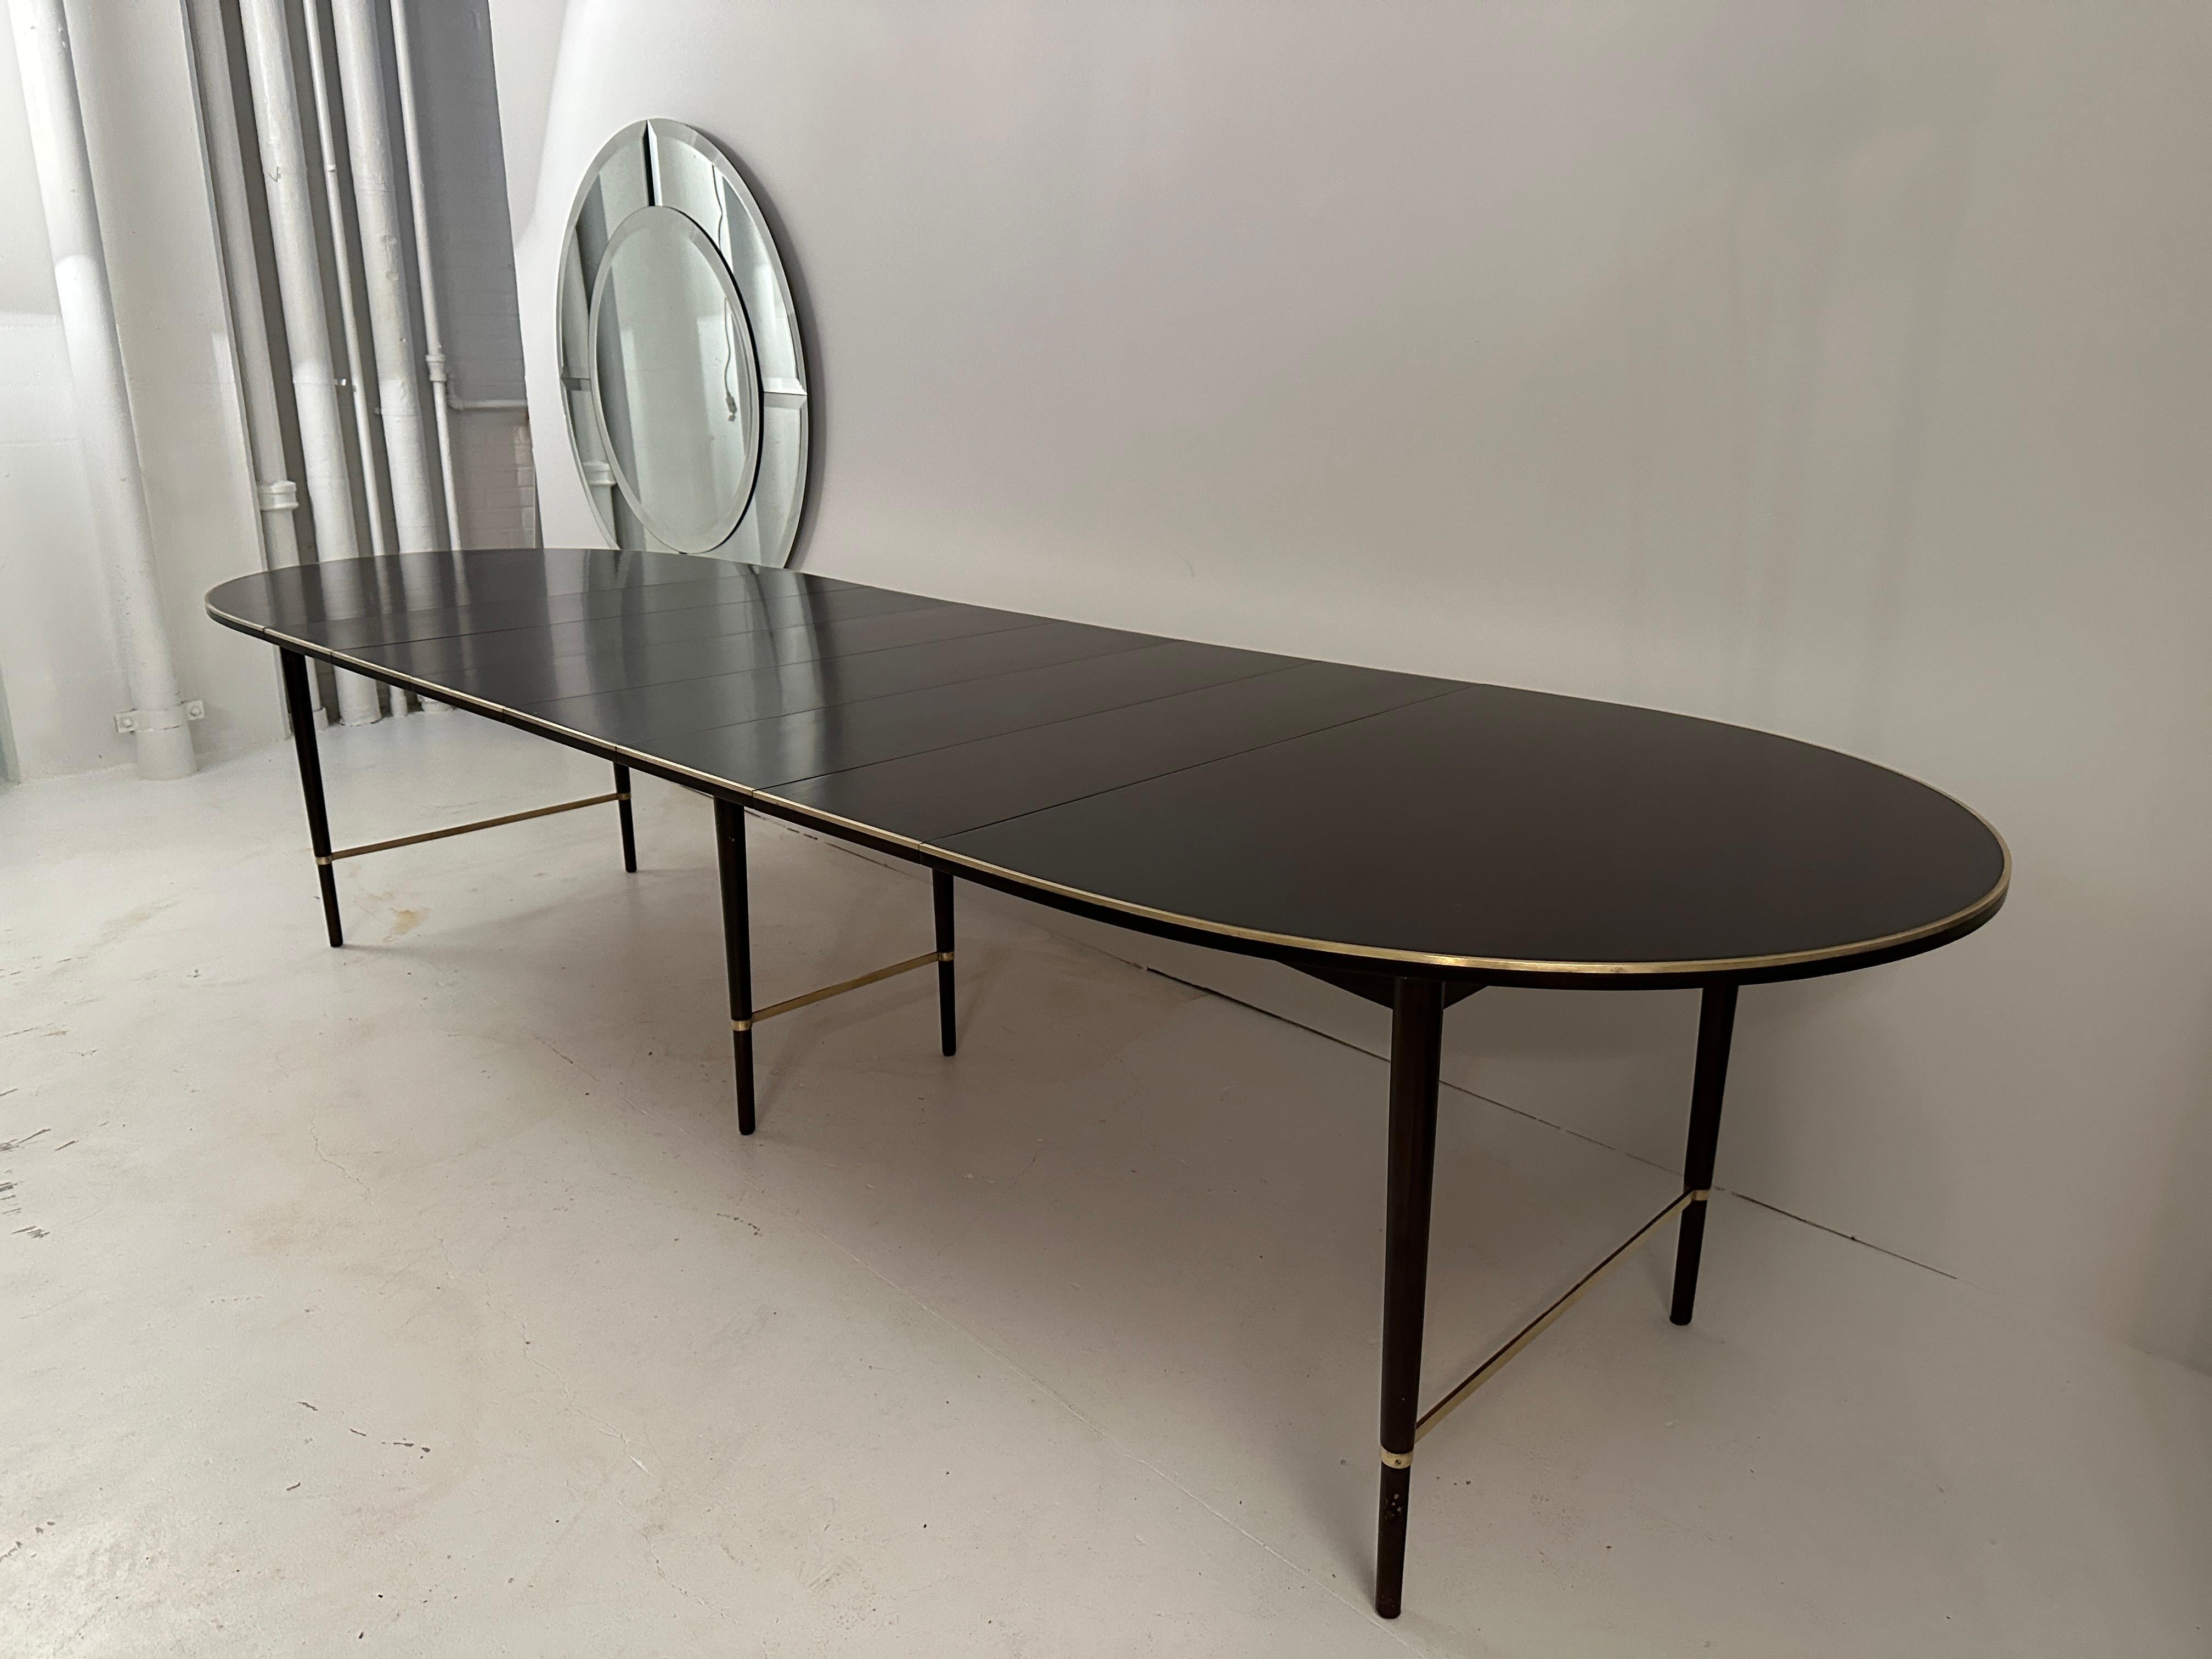 Our favorite of Paul McCobb's many iconic dining table designs, this race track oval table is wonderfully flexible. Able to be expanded from 41